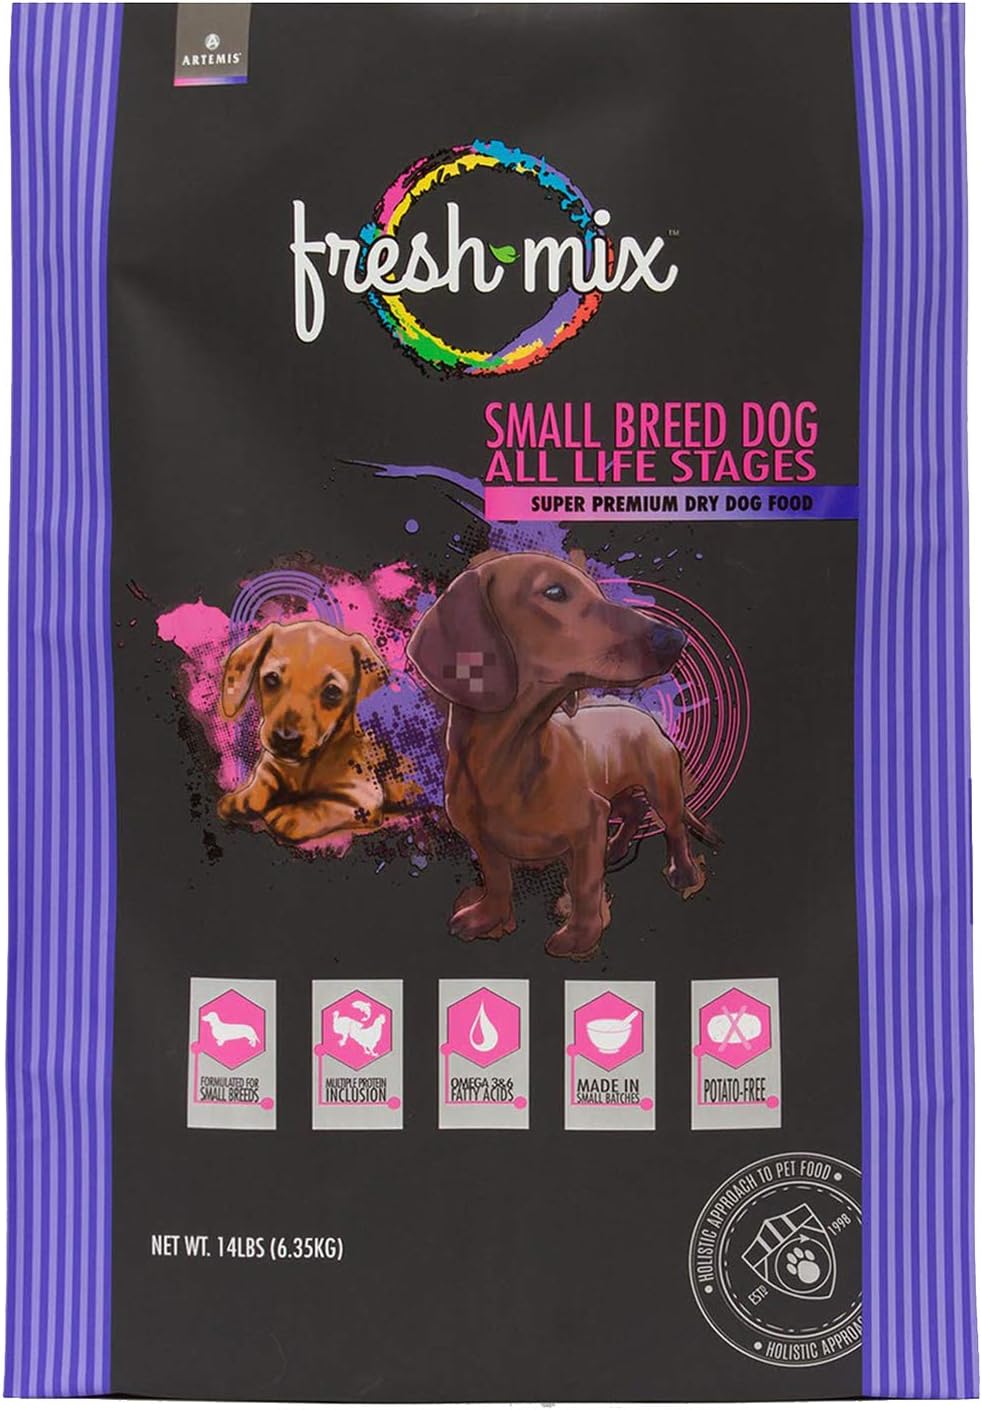 Artemis Fresh Mix Small Breed Dog All Life Stages Dry Dog Food – Gallery Image 1